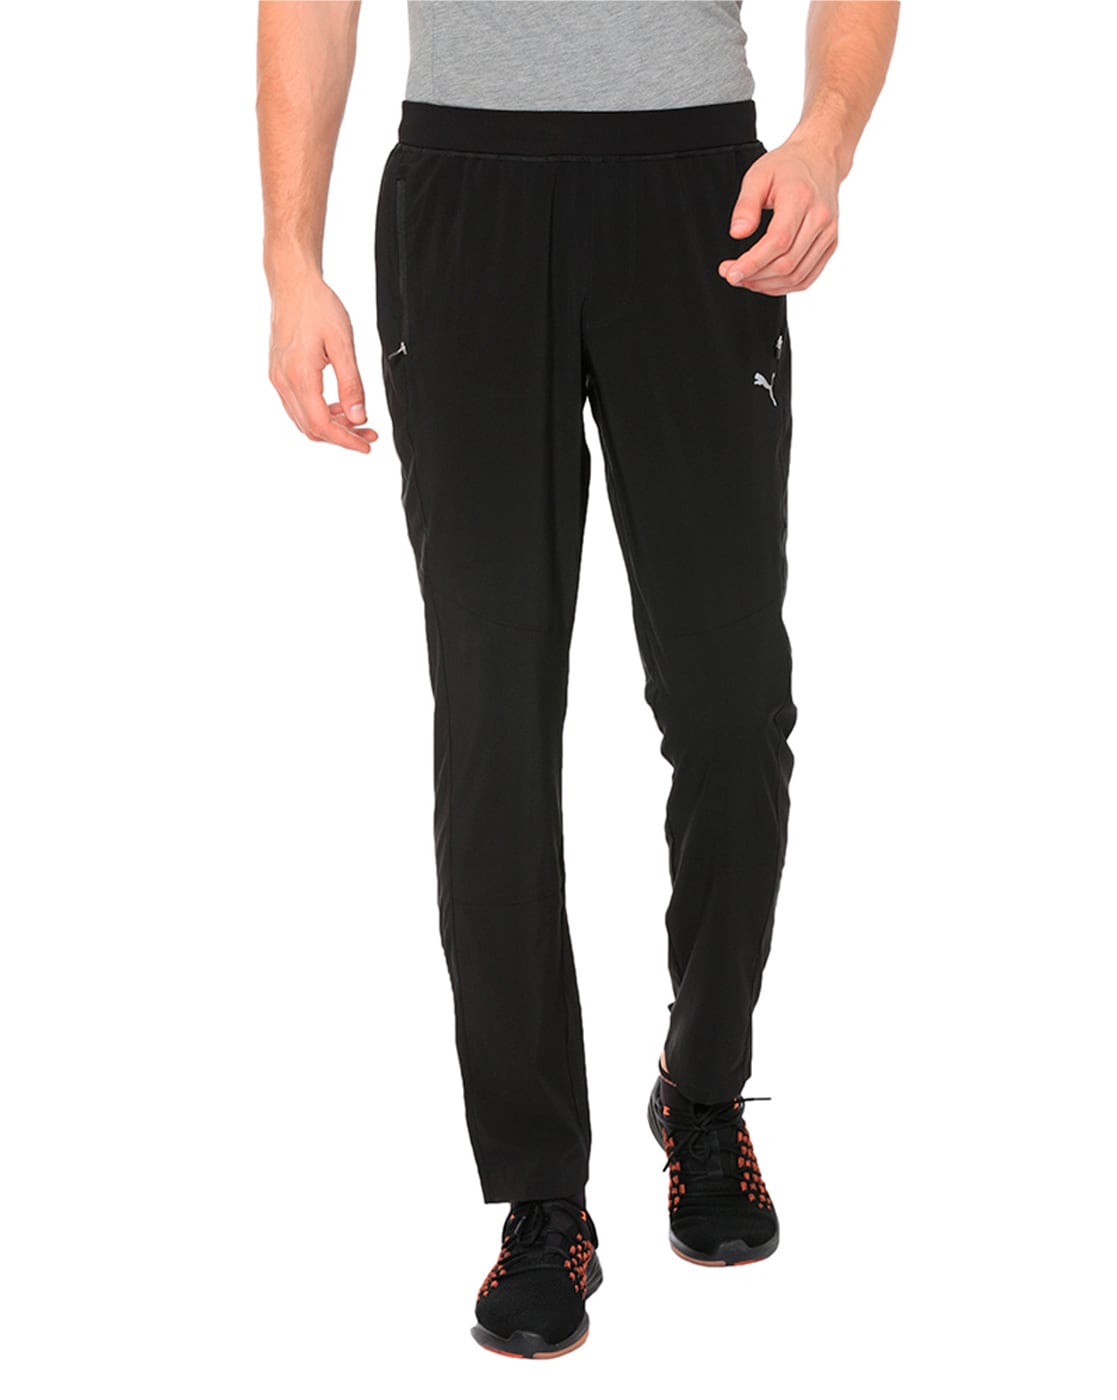 G Gradual Men's Sweatpants with Zipper Pockets Tapered Track Athletic Pants  for Men Running, Exercise, Workout (Dark Green, Small) : Amazon.in:  Clothing & Accessories